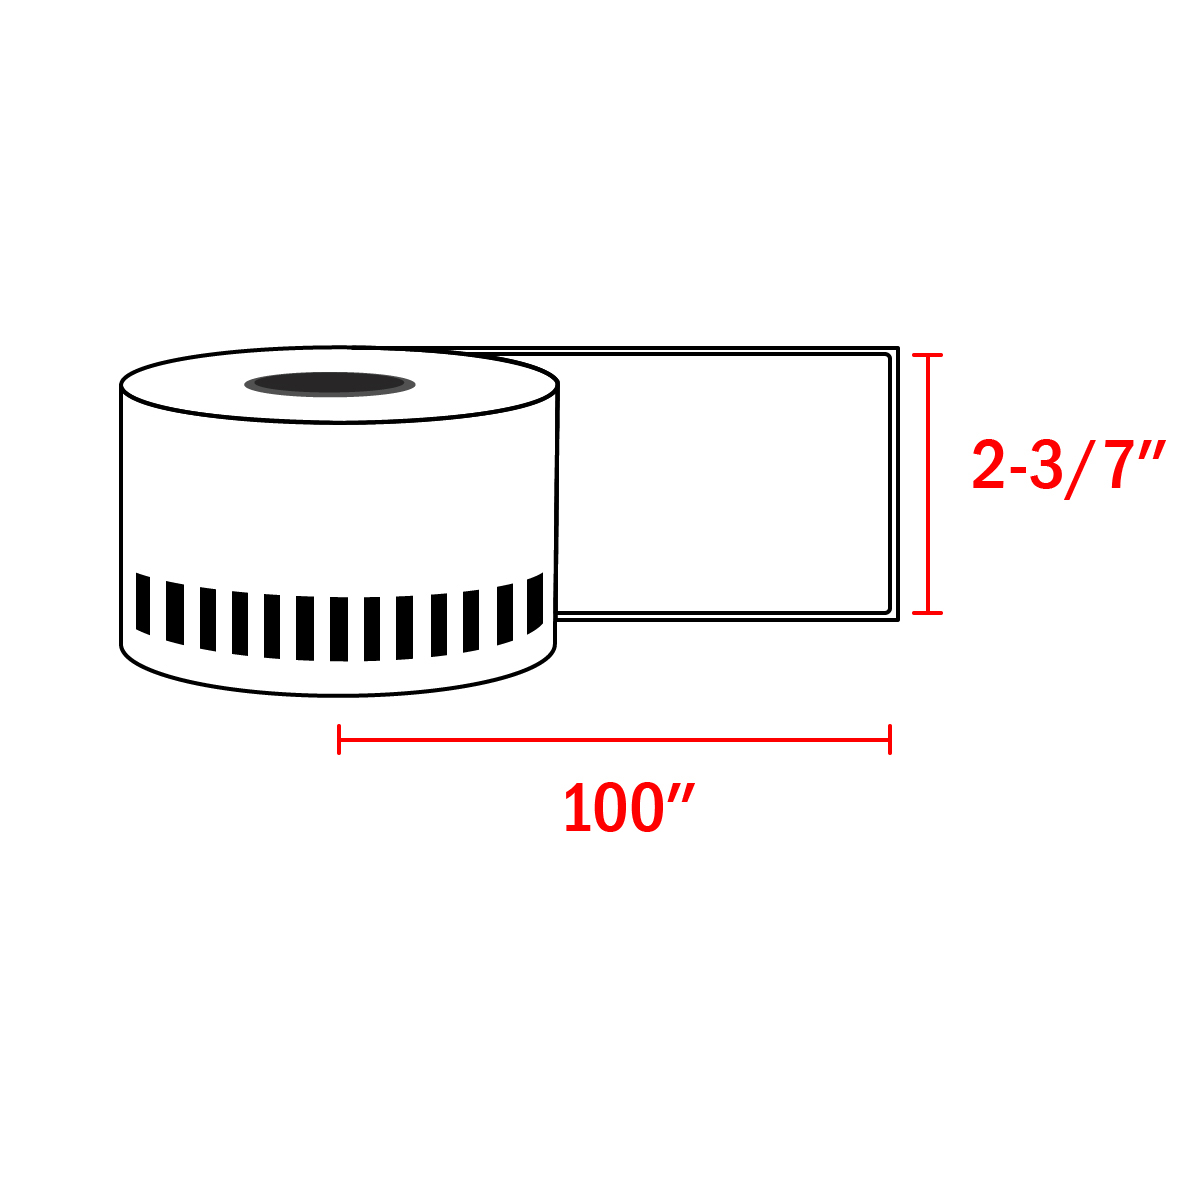 Brother DK 2205 Labels | 2-3/7" x 100 Feet Continuous Paper Labels